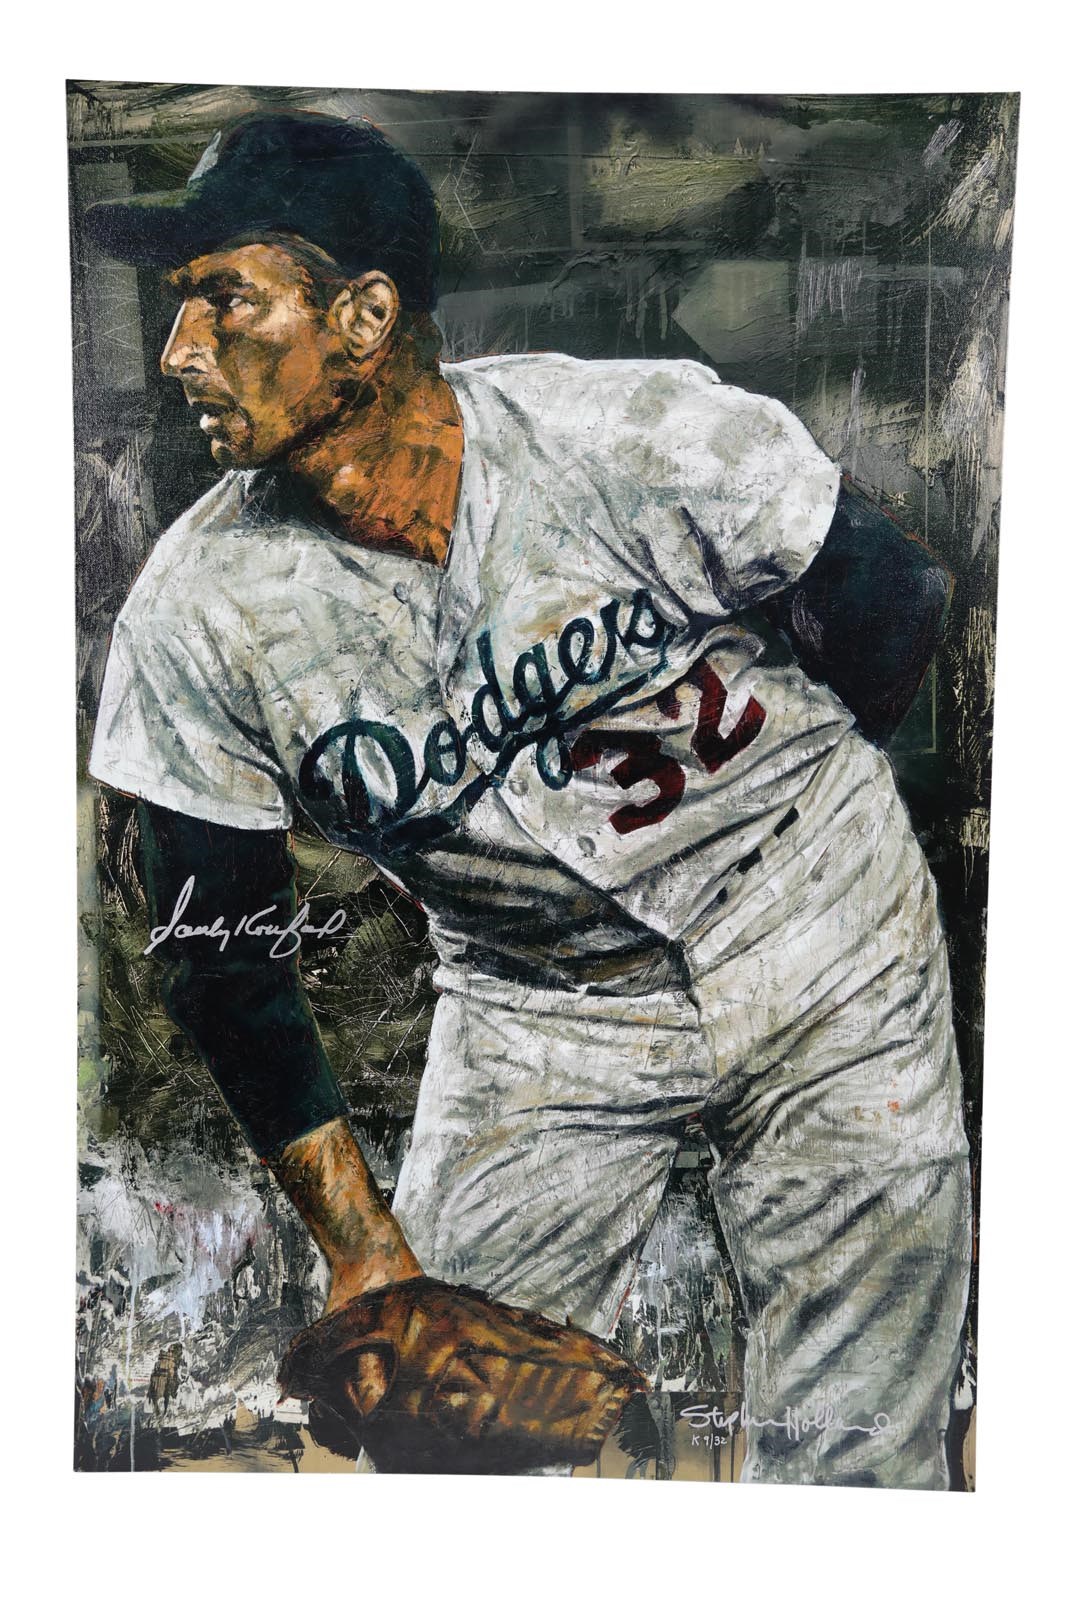 - Koufax "Profile" Special K Holland Proof Giclee